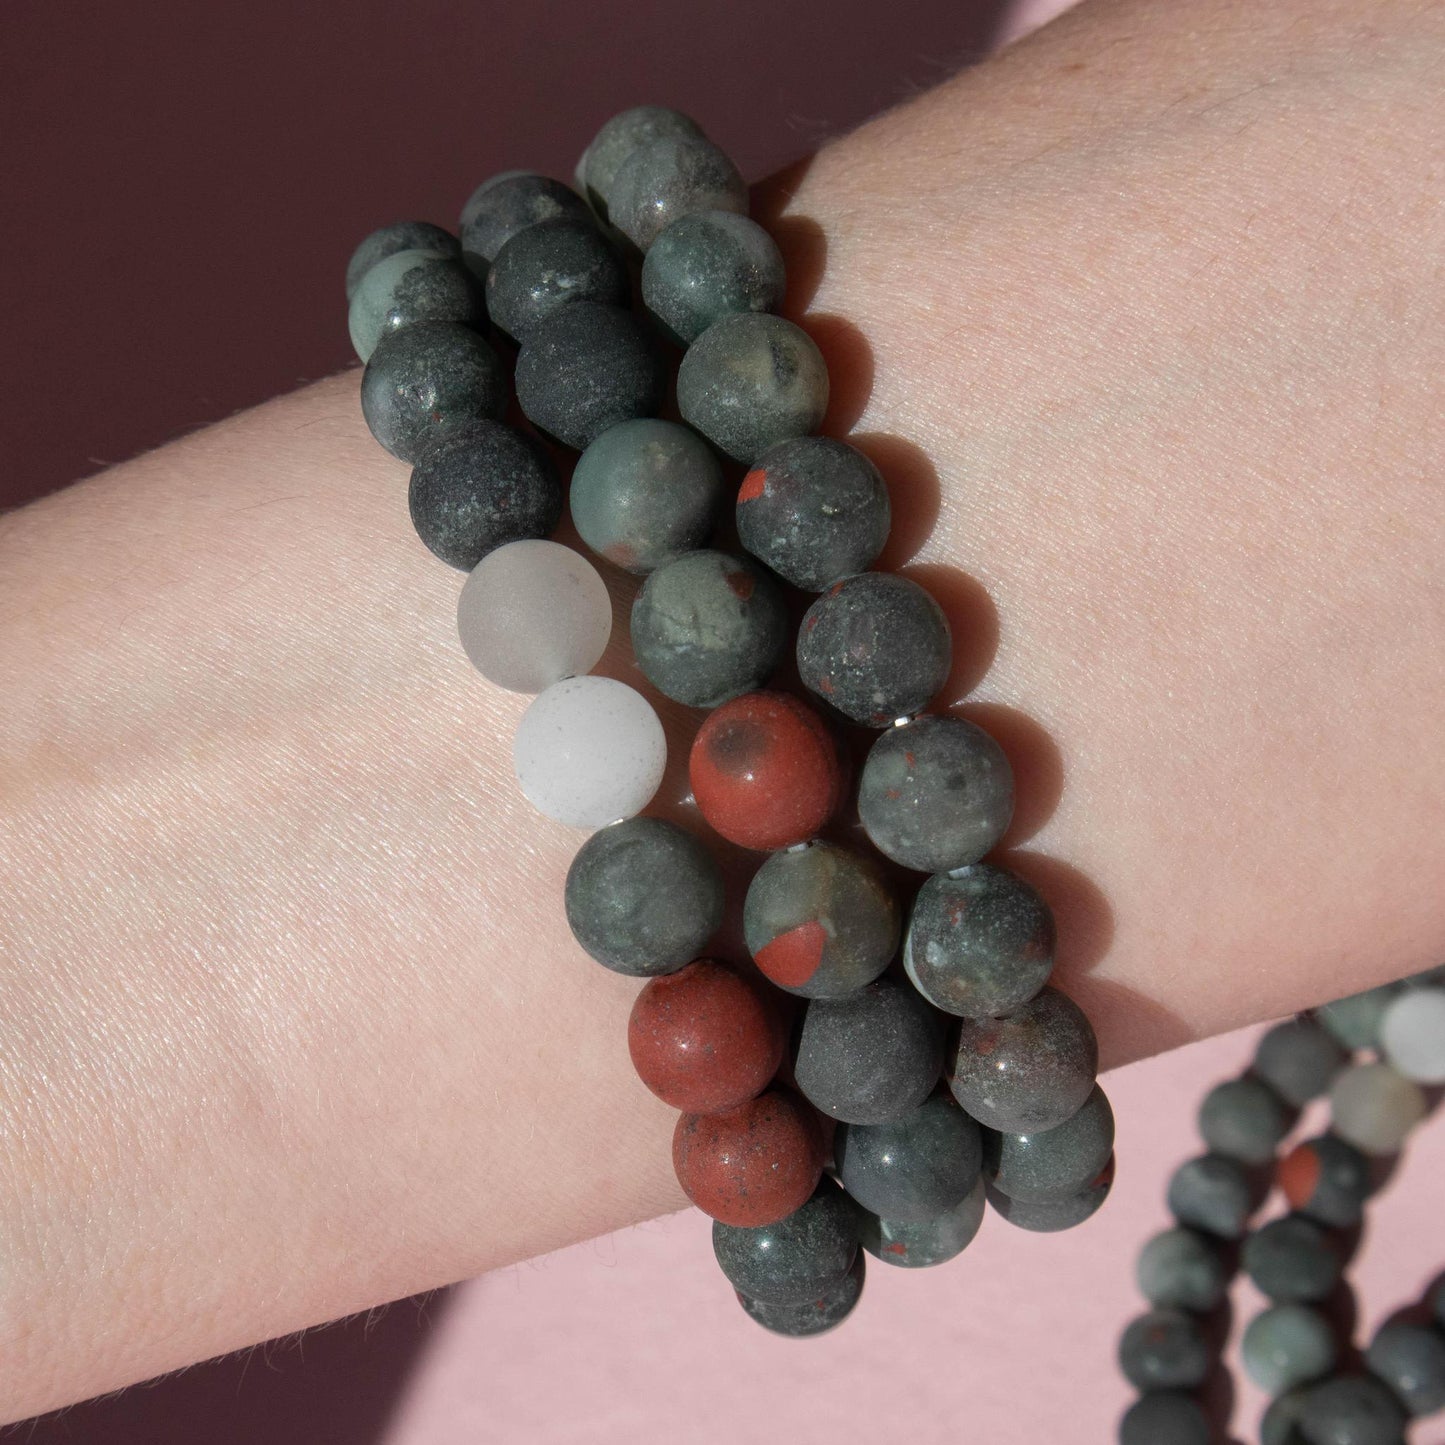 bloodstone, matte bloodstone, bloodstone bracelet, bloodstone jewelry, men's bloodstone bracelet, men's gemstone bracelet, gemstone jewelry for men, men's gemstone jewelry, bloodstone crystal, bloodstone gemstone, bloodstone properties, bloodstone healing properties, bloodstone metaphysical properties, bloodstone meaning